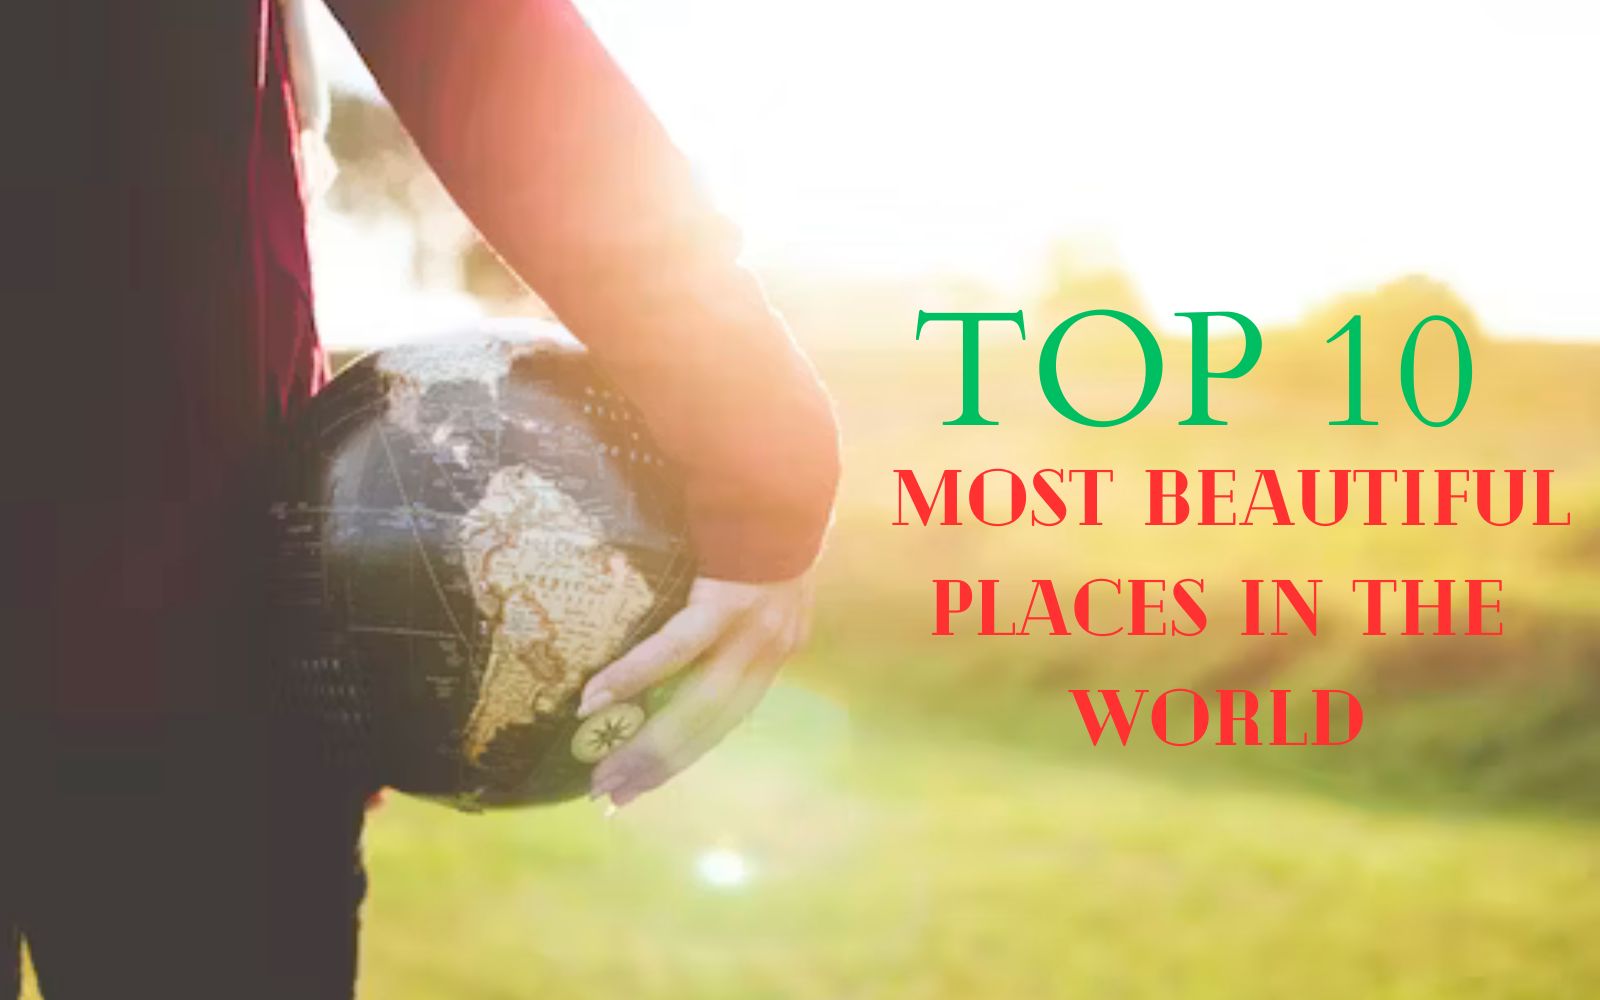 Top 10 Most Beautiful Places in the World